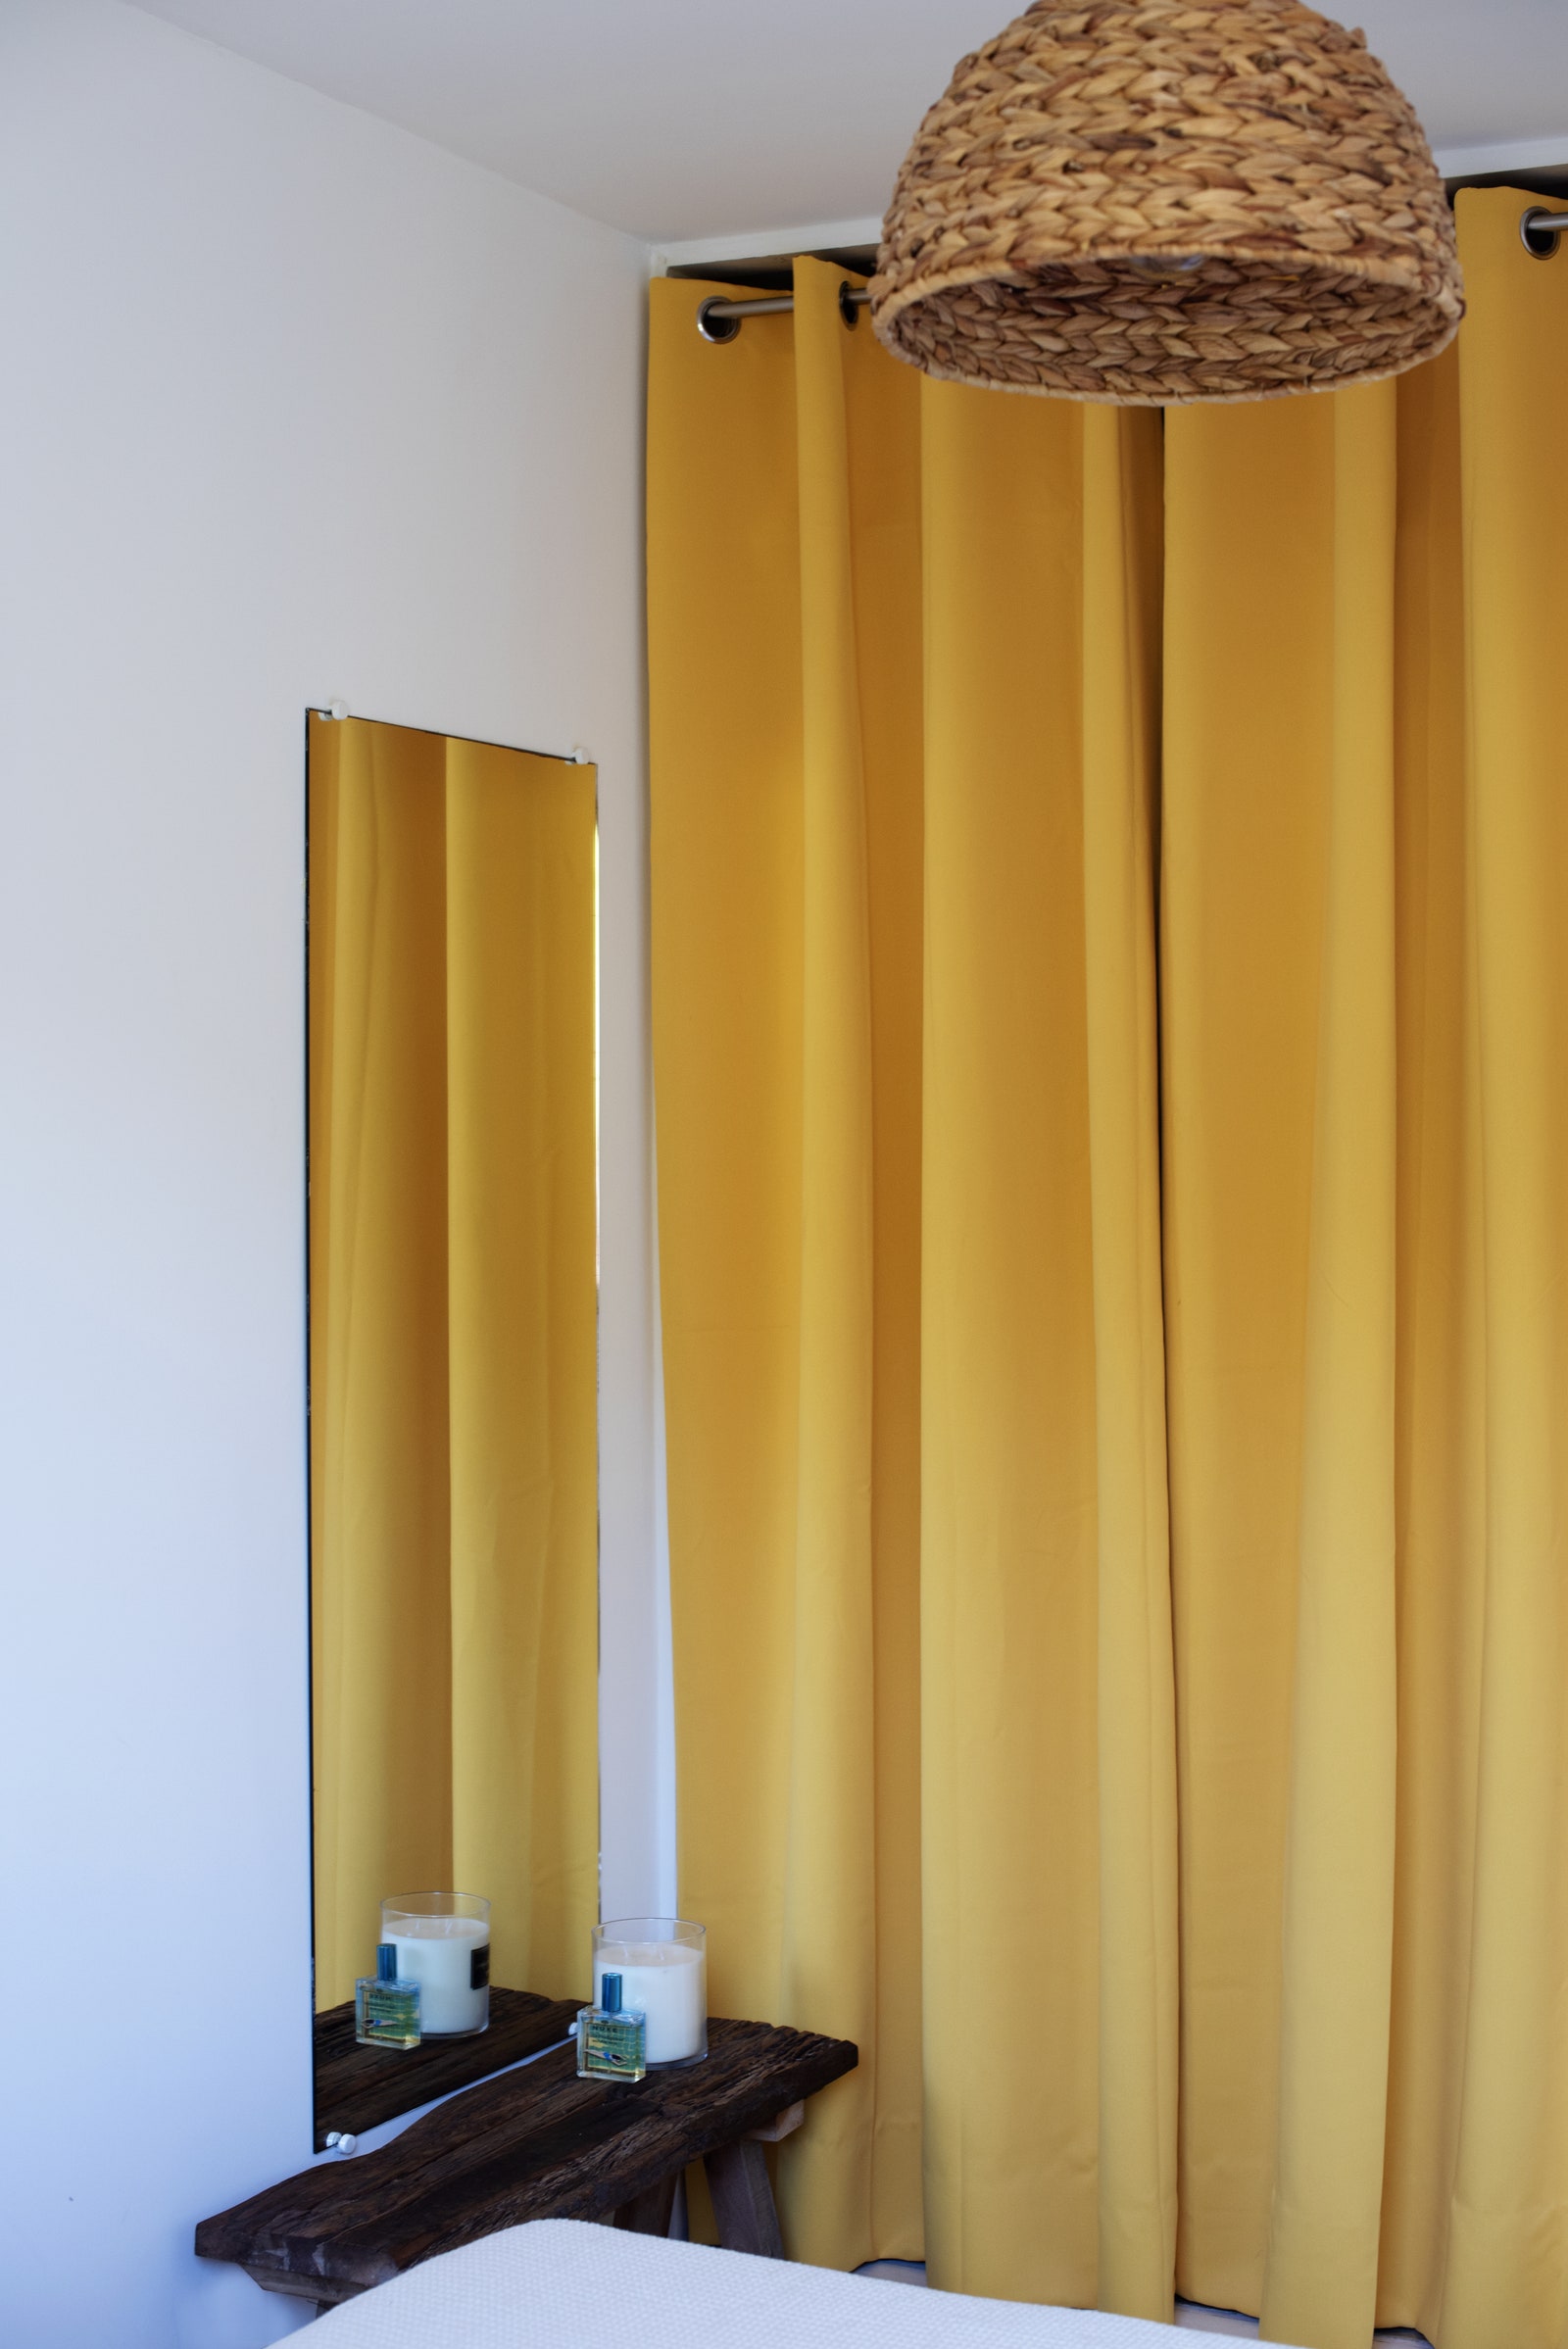 In the bedroom, raw simplicity is awakened by large yellow curtains and a woven straw pendant light.